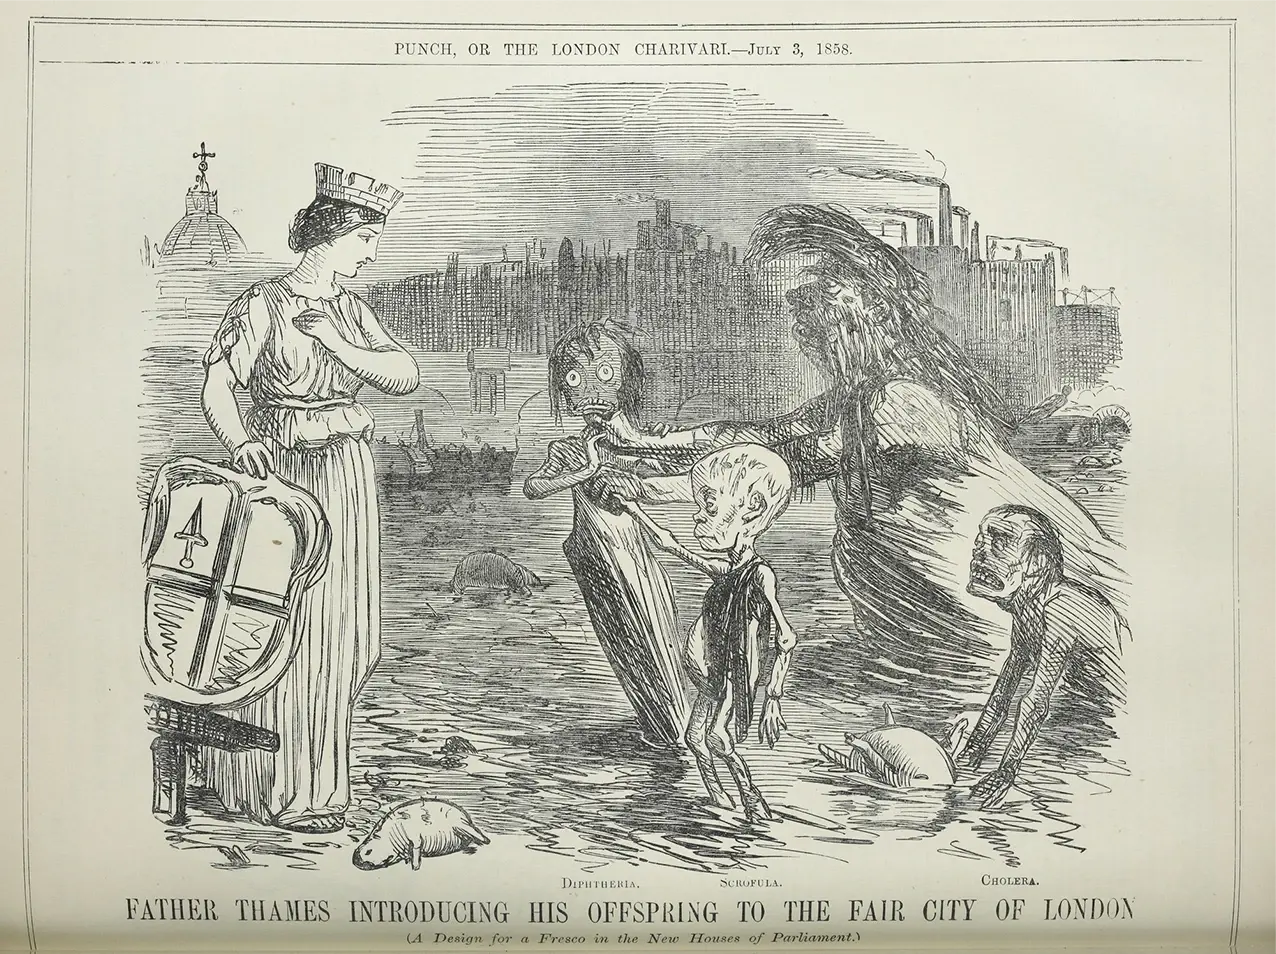 In 1858, London faced the “Great Stink” caused by the foul odour of the Thames due to untreated human and factory waste. The smell was so awful that people feared it would make them sick. The government acted, building a system of pipes and tunnels to carry dirty water and waste away for cleaning, making the river cleaner.